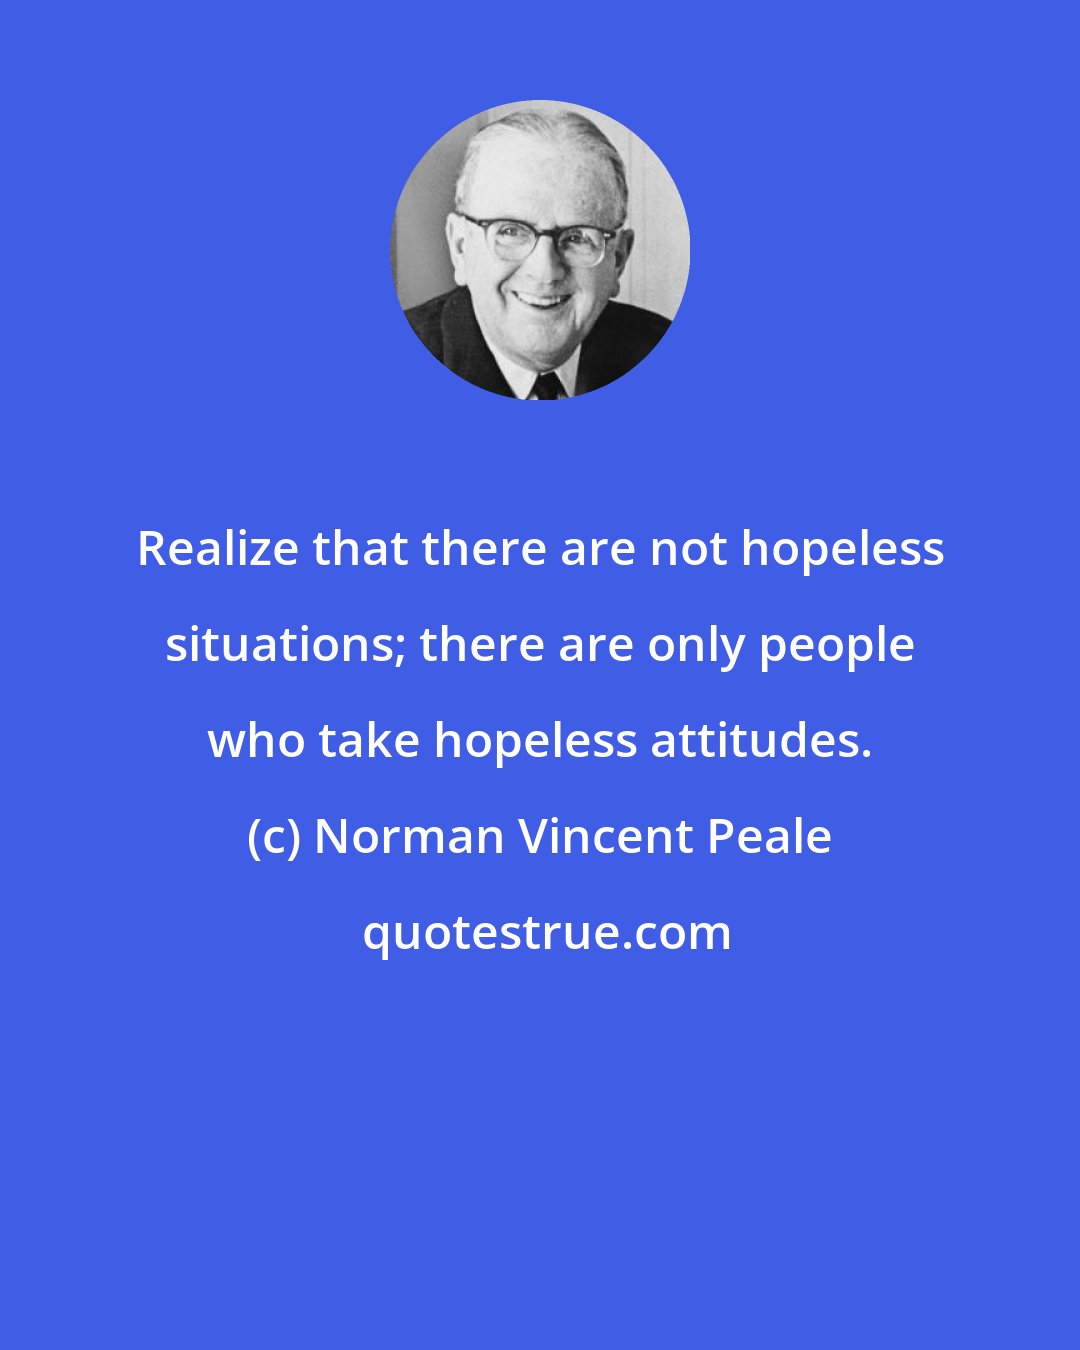 Norman Vincent Peale: Realize that there are not hopeless situations; there are only people who take hopeless attitudes.